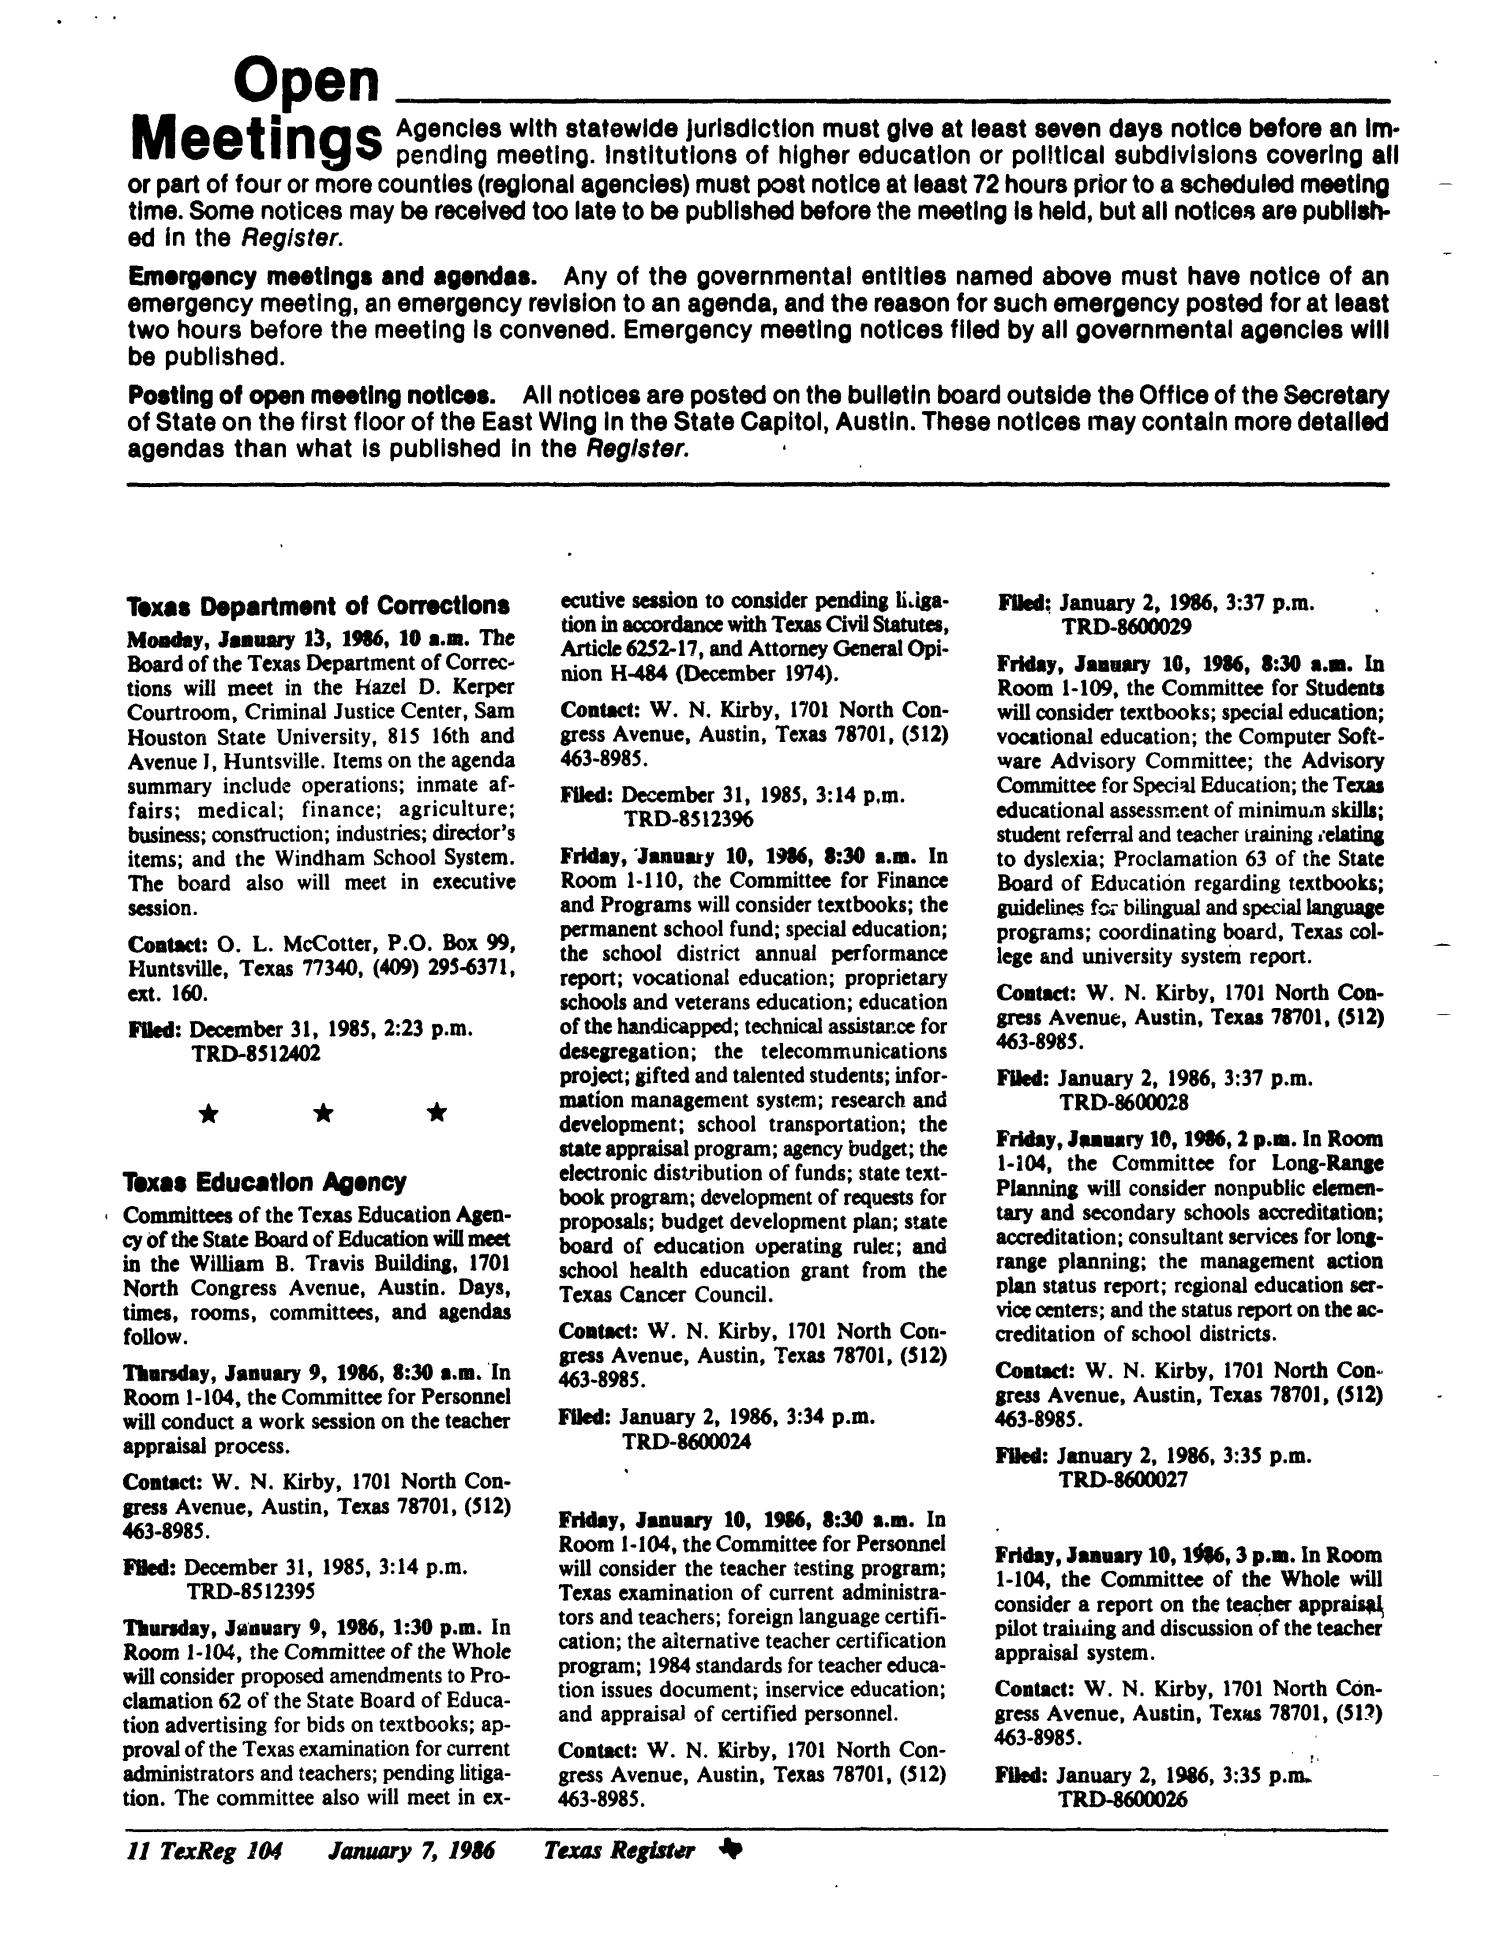 Texas Register, Volume 11, Number 2, Pages 81-106, January 7, 1986
                                                
                                                    104
                                                